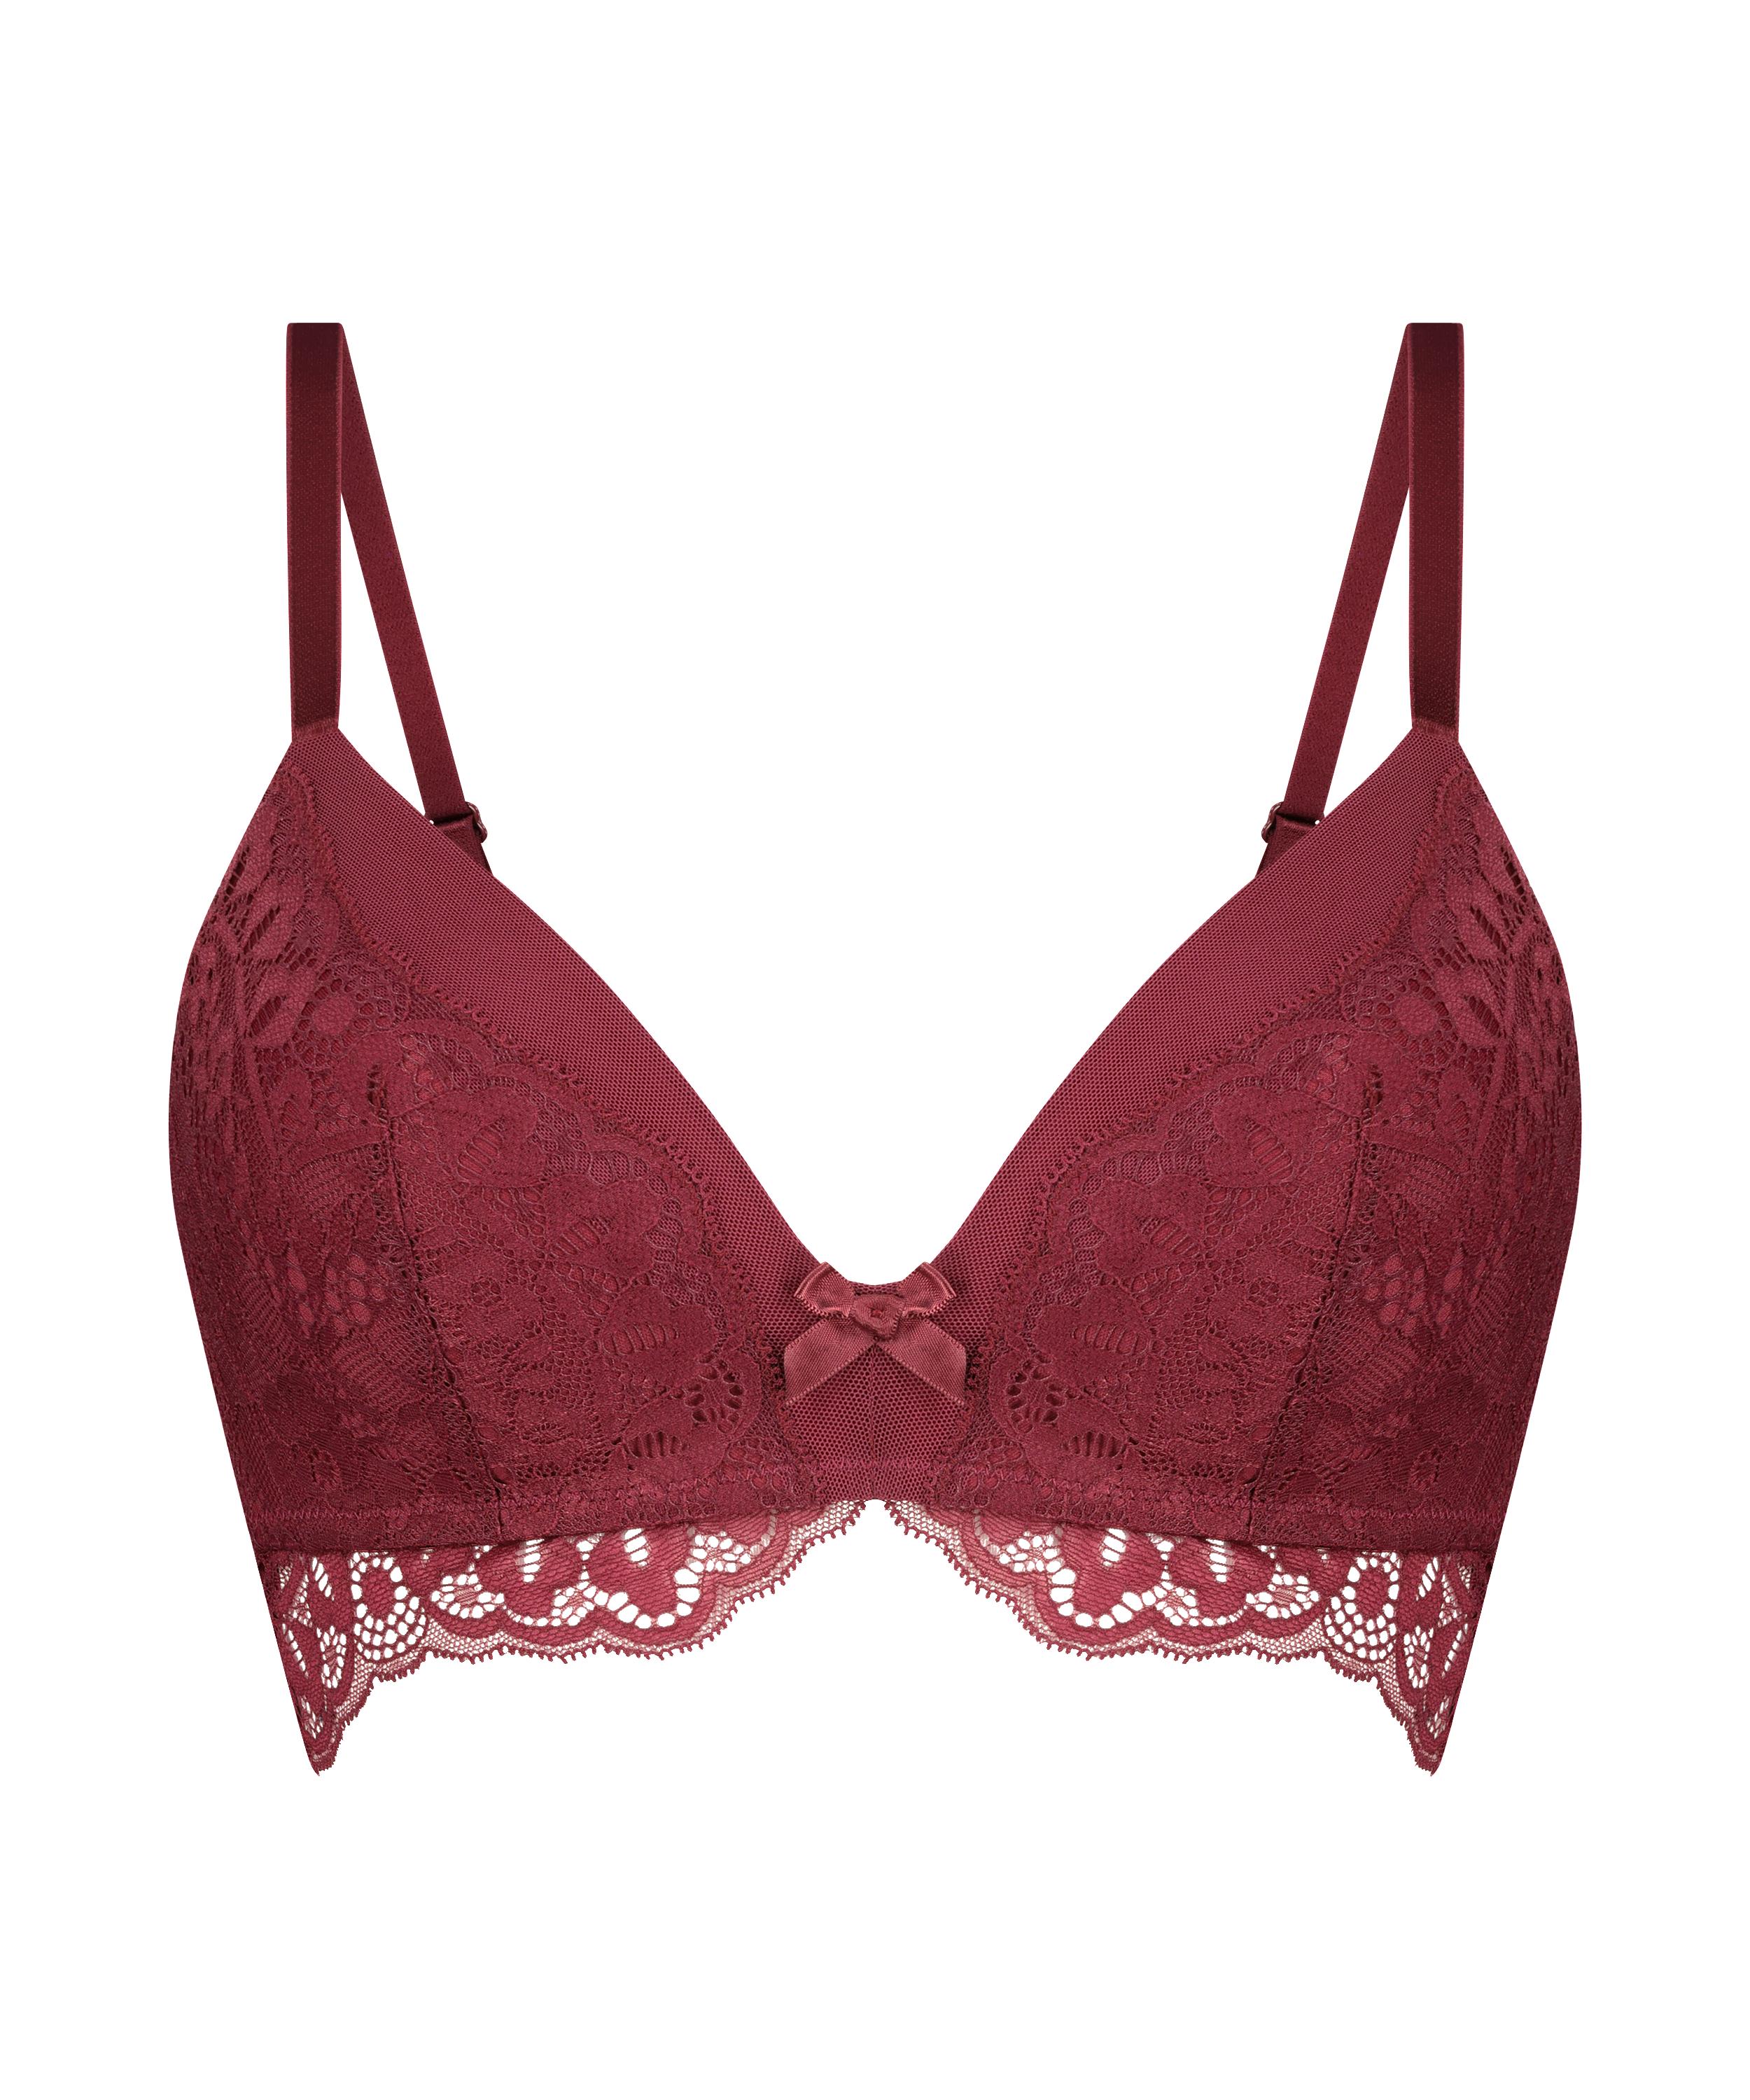 Tia Padded Non-Wired Bra for £29 - Non-wired Bras - Hunkemöller